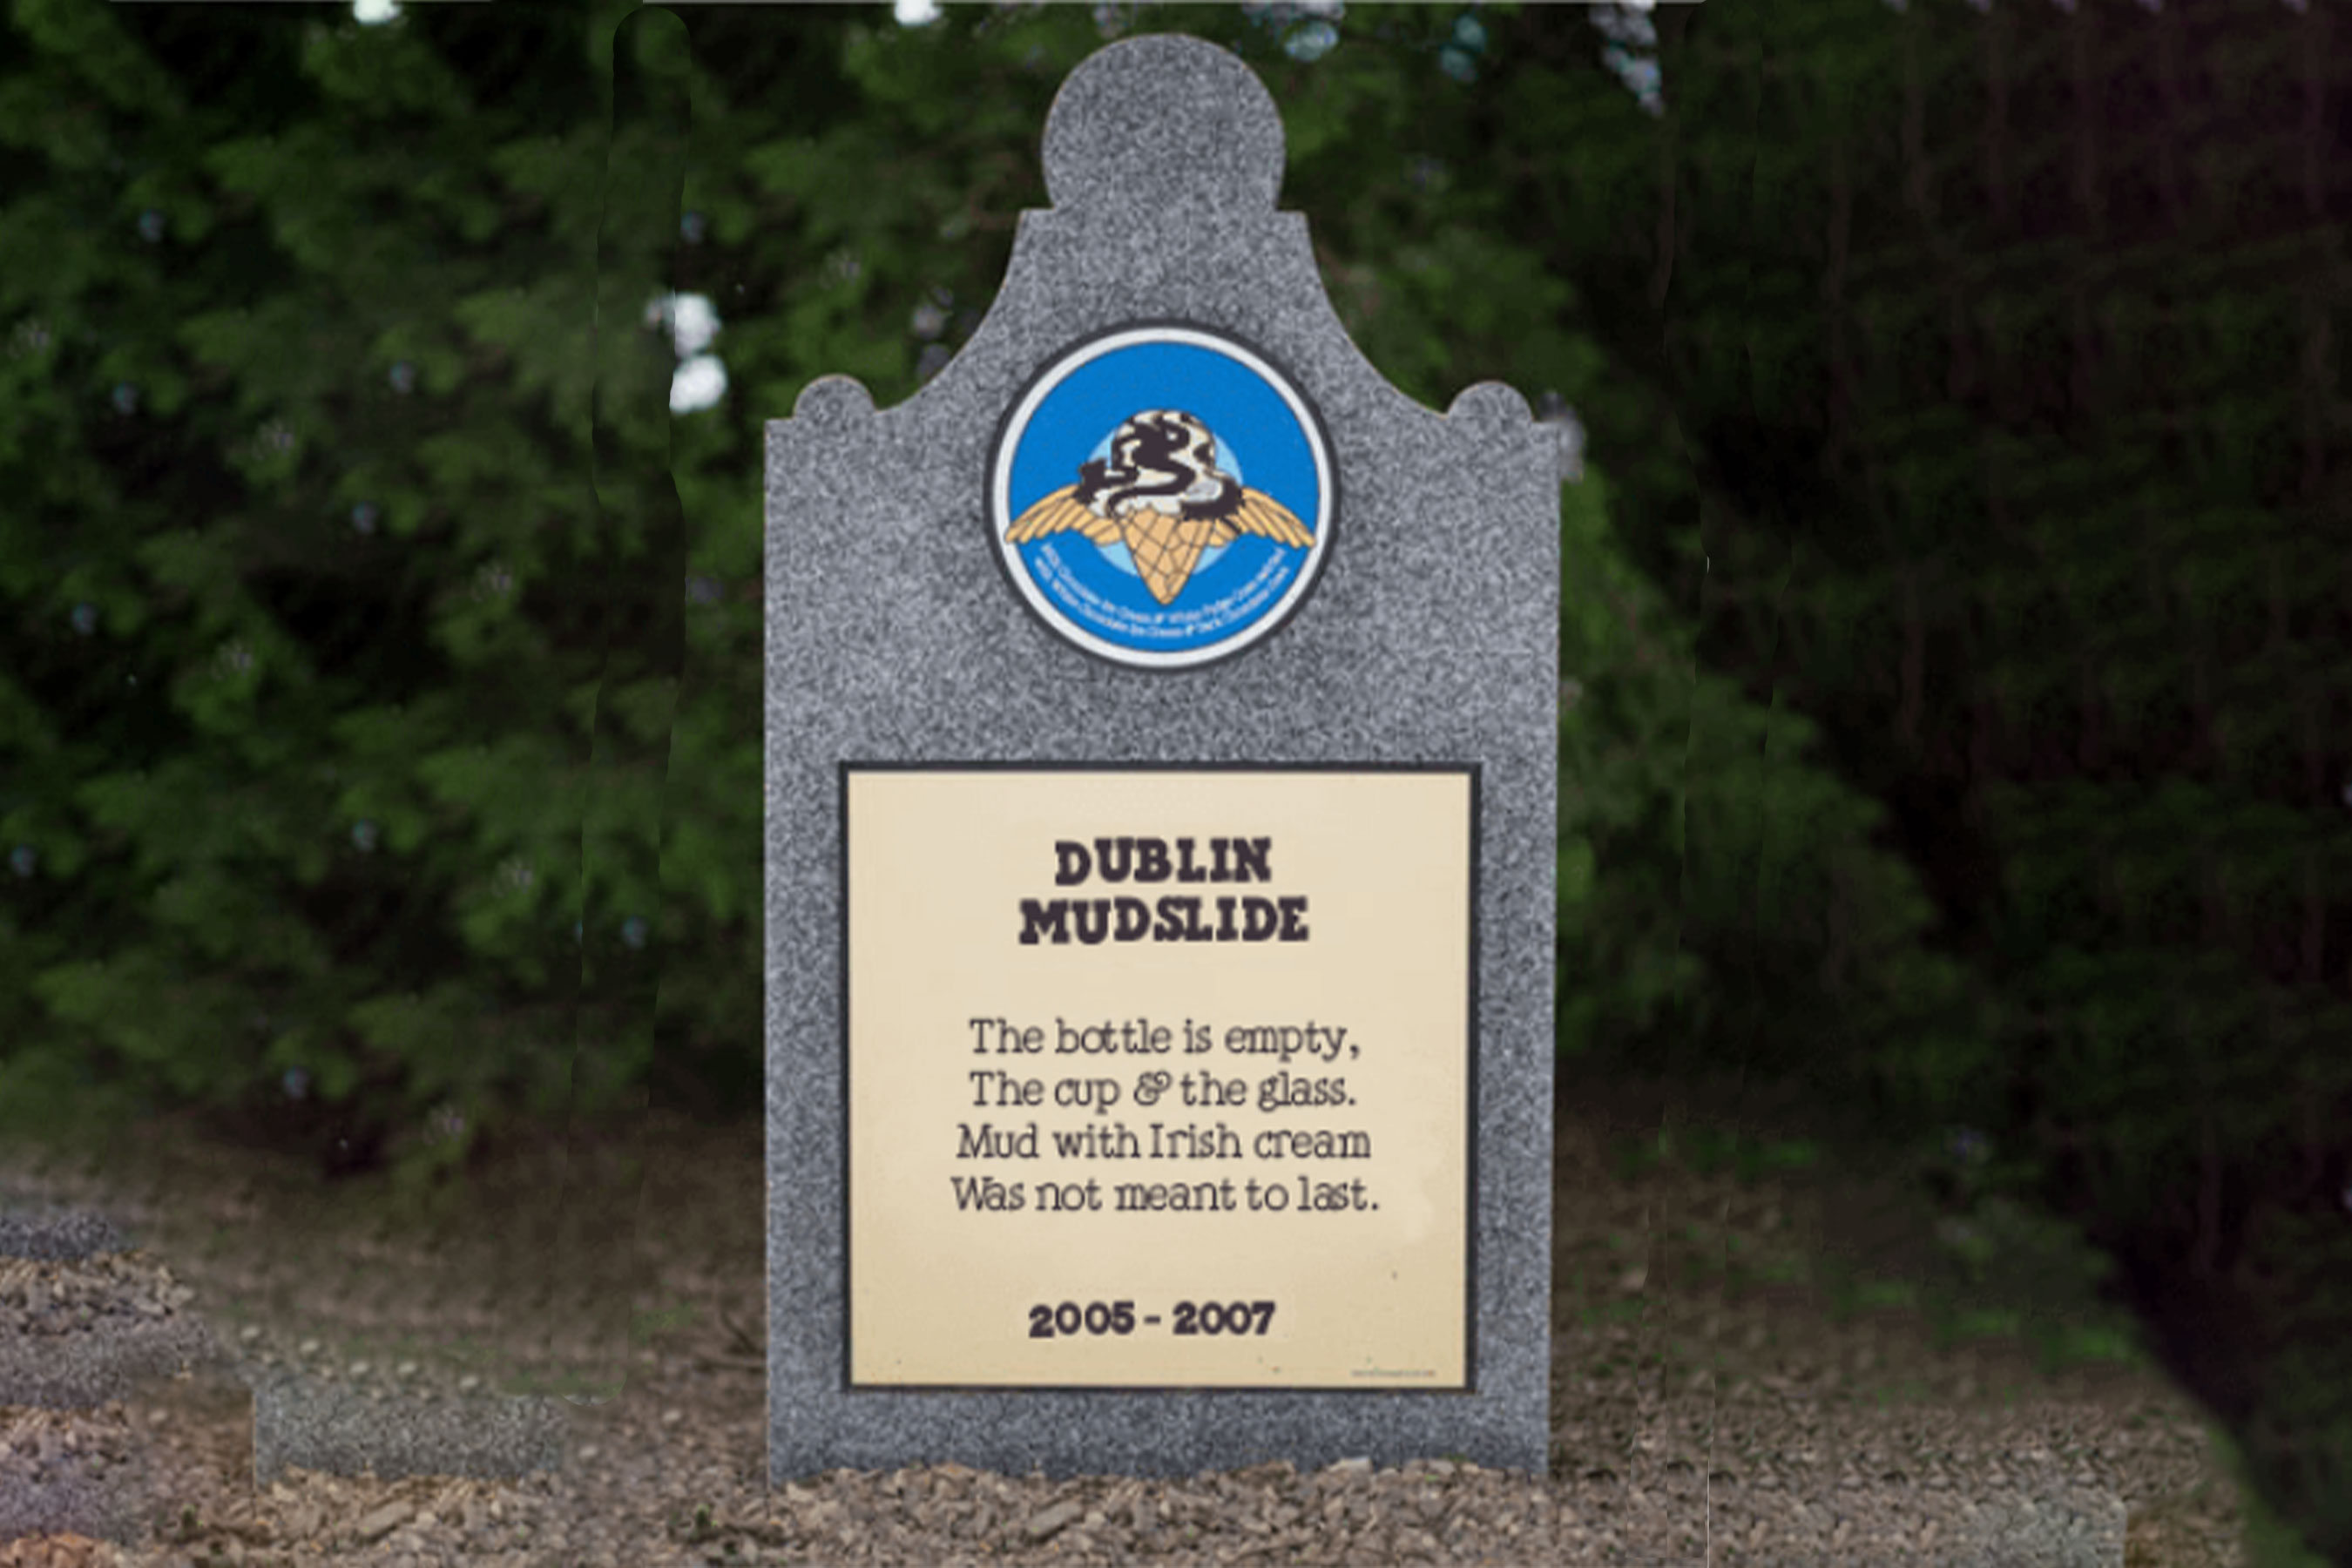 The original Dublin Mudslide was introduced as a Limited Batch in 2004 and was sent to the Flavor Graveyard three years later.